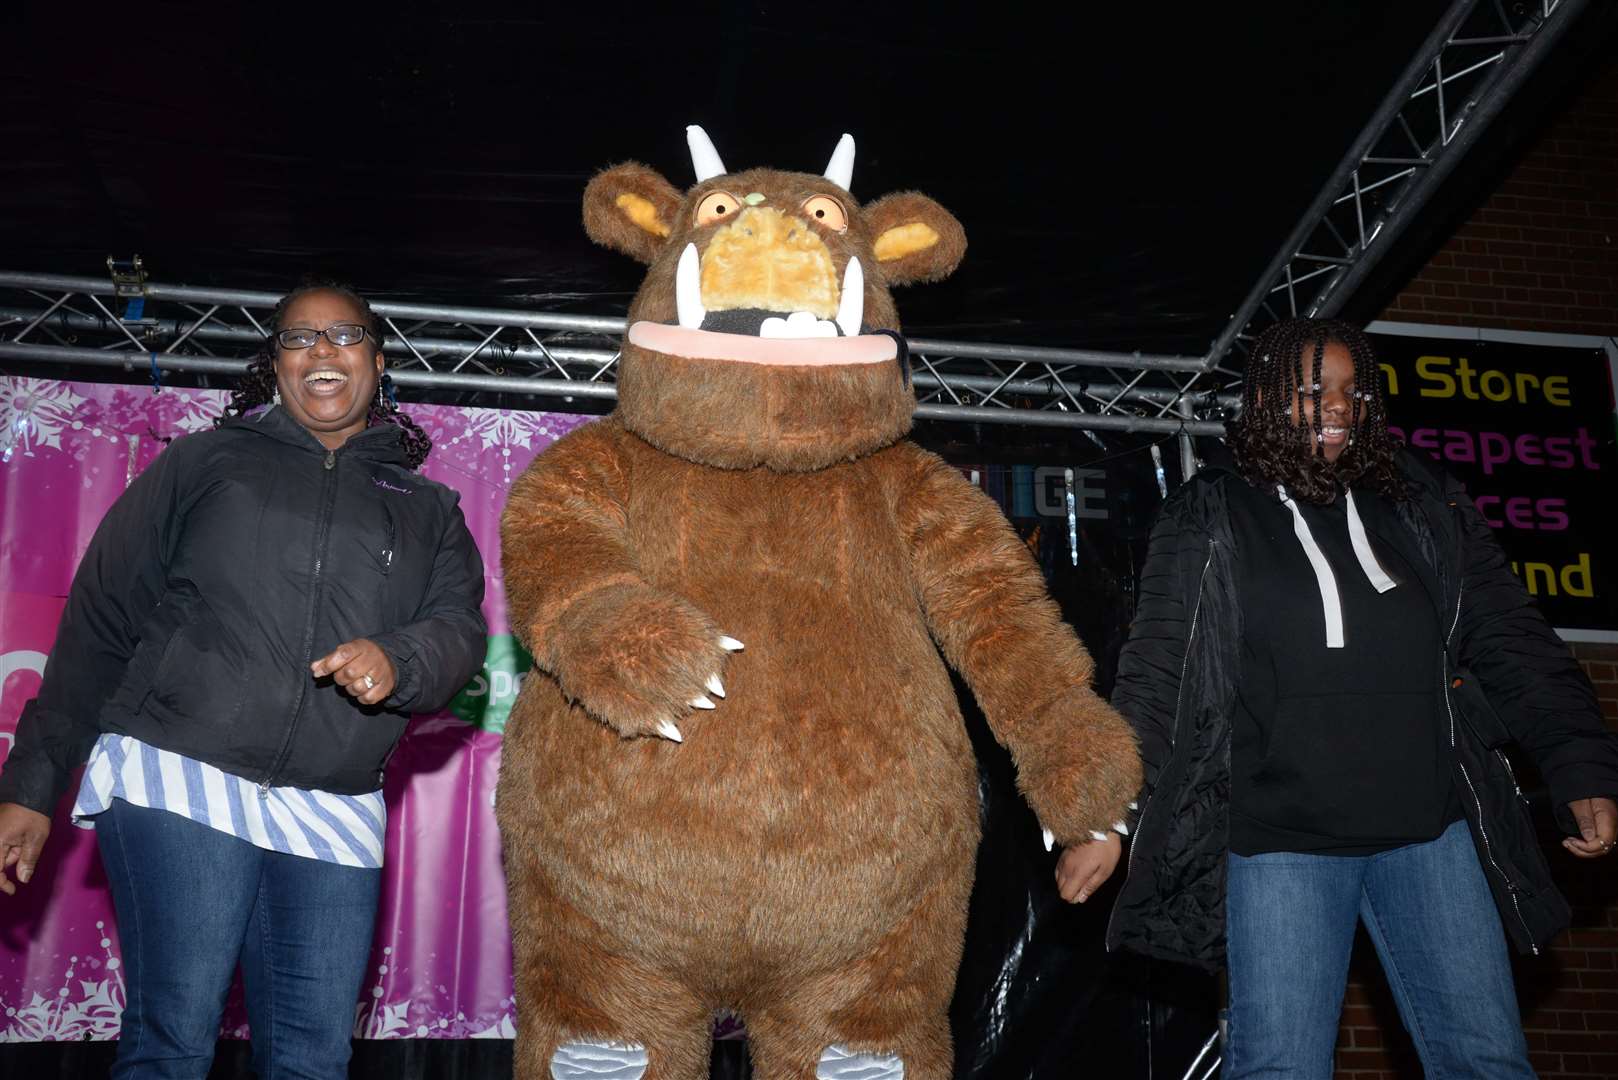 Contestants floss with The Gruffalo on stage at the Christmas lights switch-on. Picture: Chris Davey